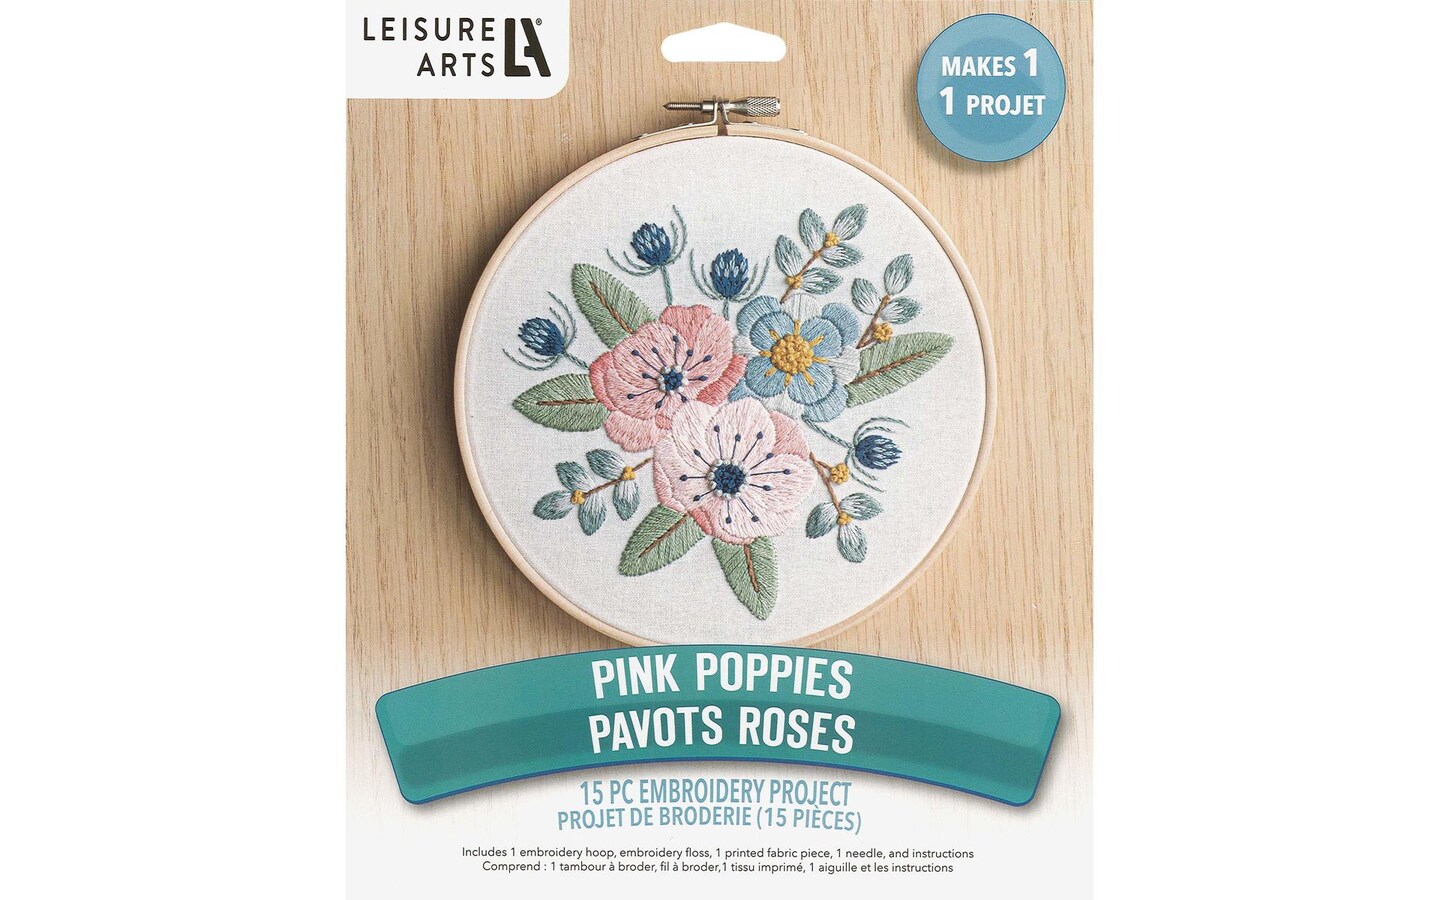 Leisure Arts Embroidery Kit 6 Pink Poppies - embroidery kit for